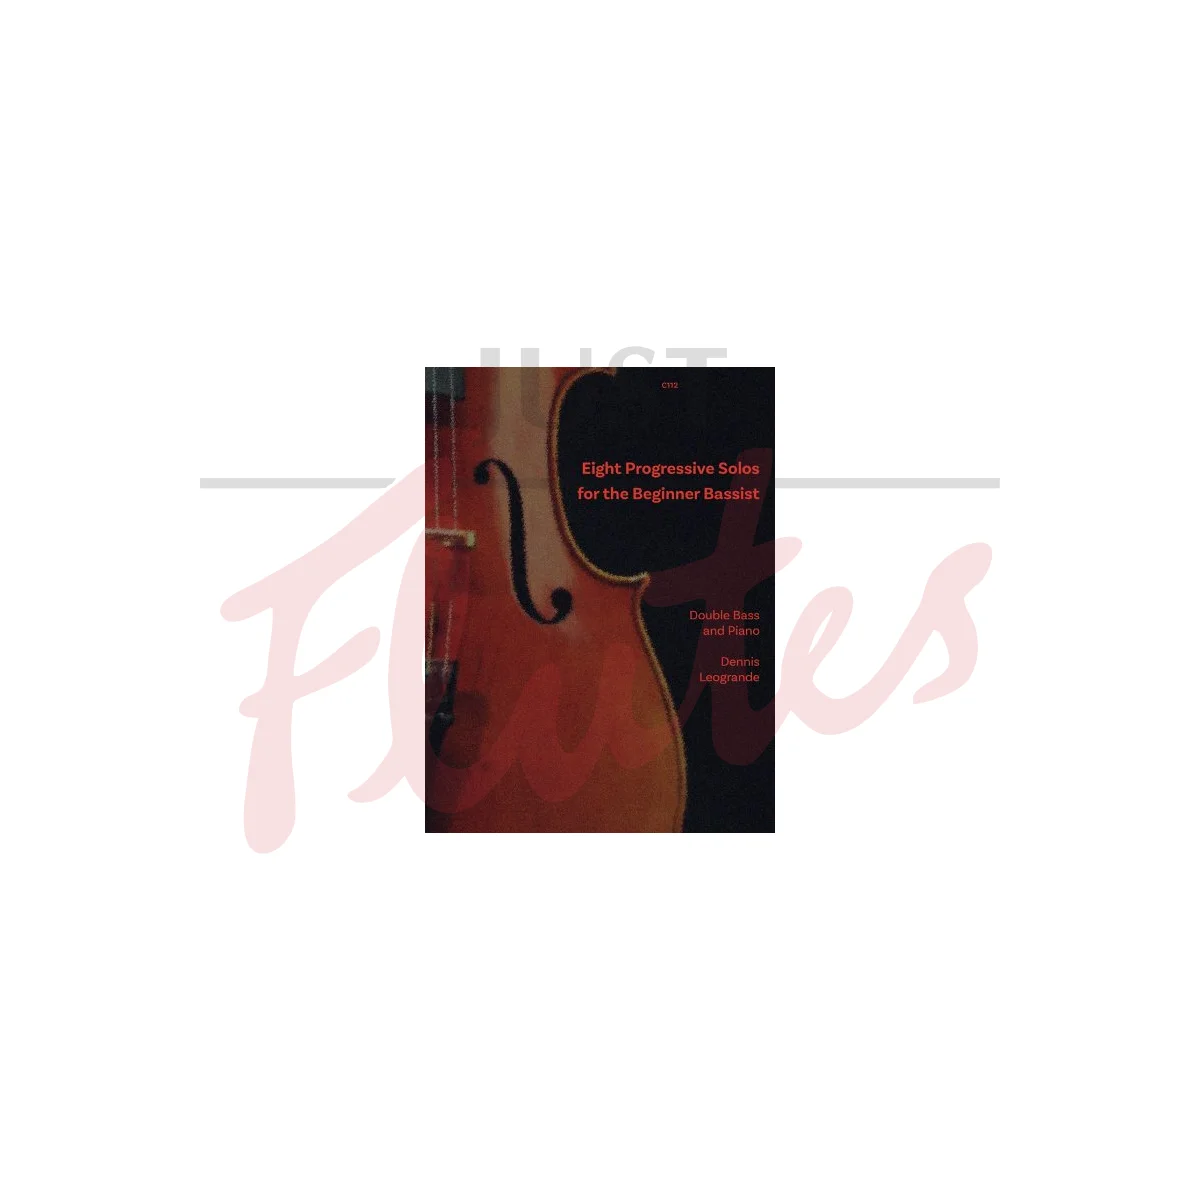 Progressive Solos for the Beginner Bassist for Double Bass and Piano